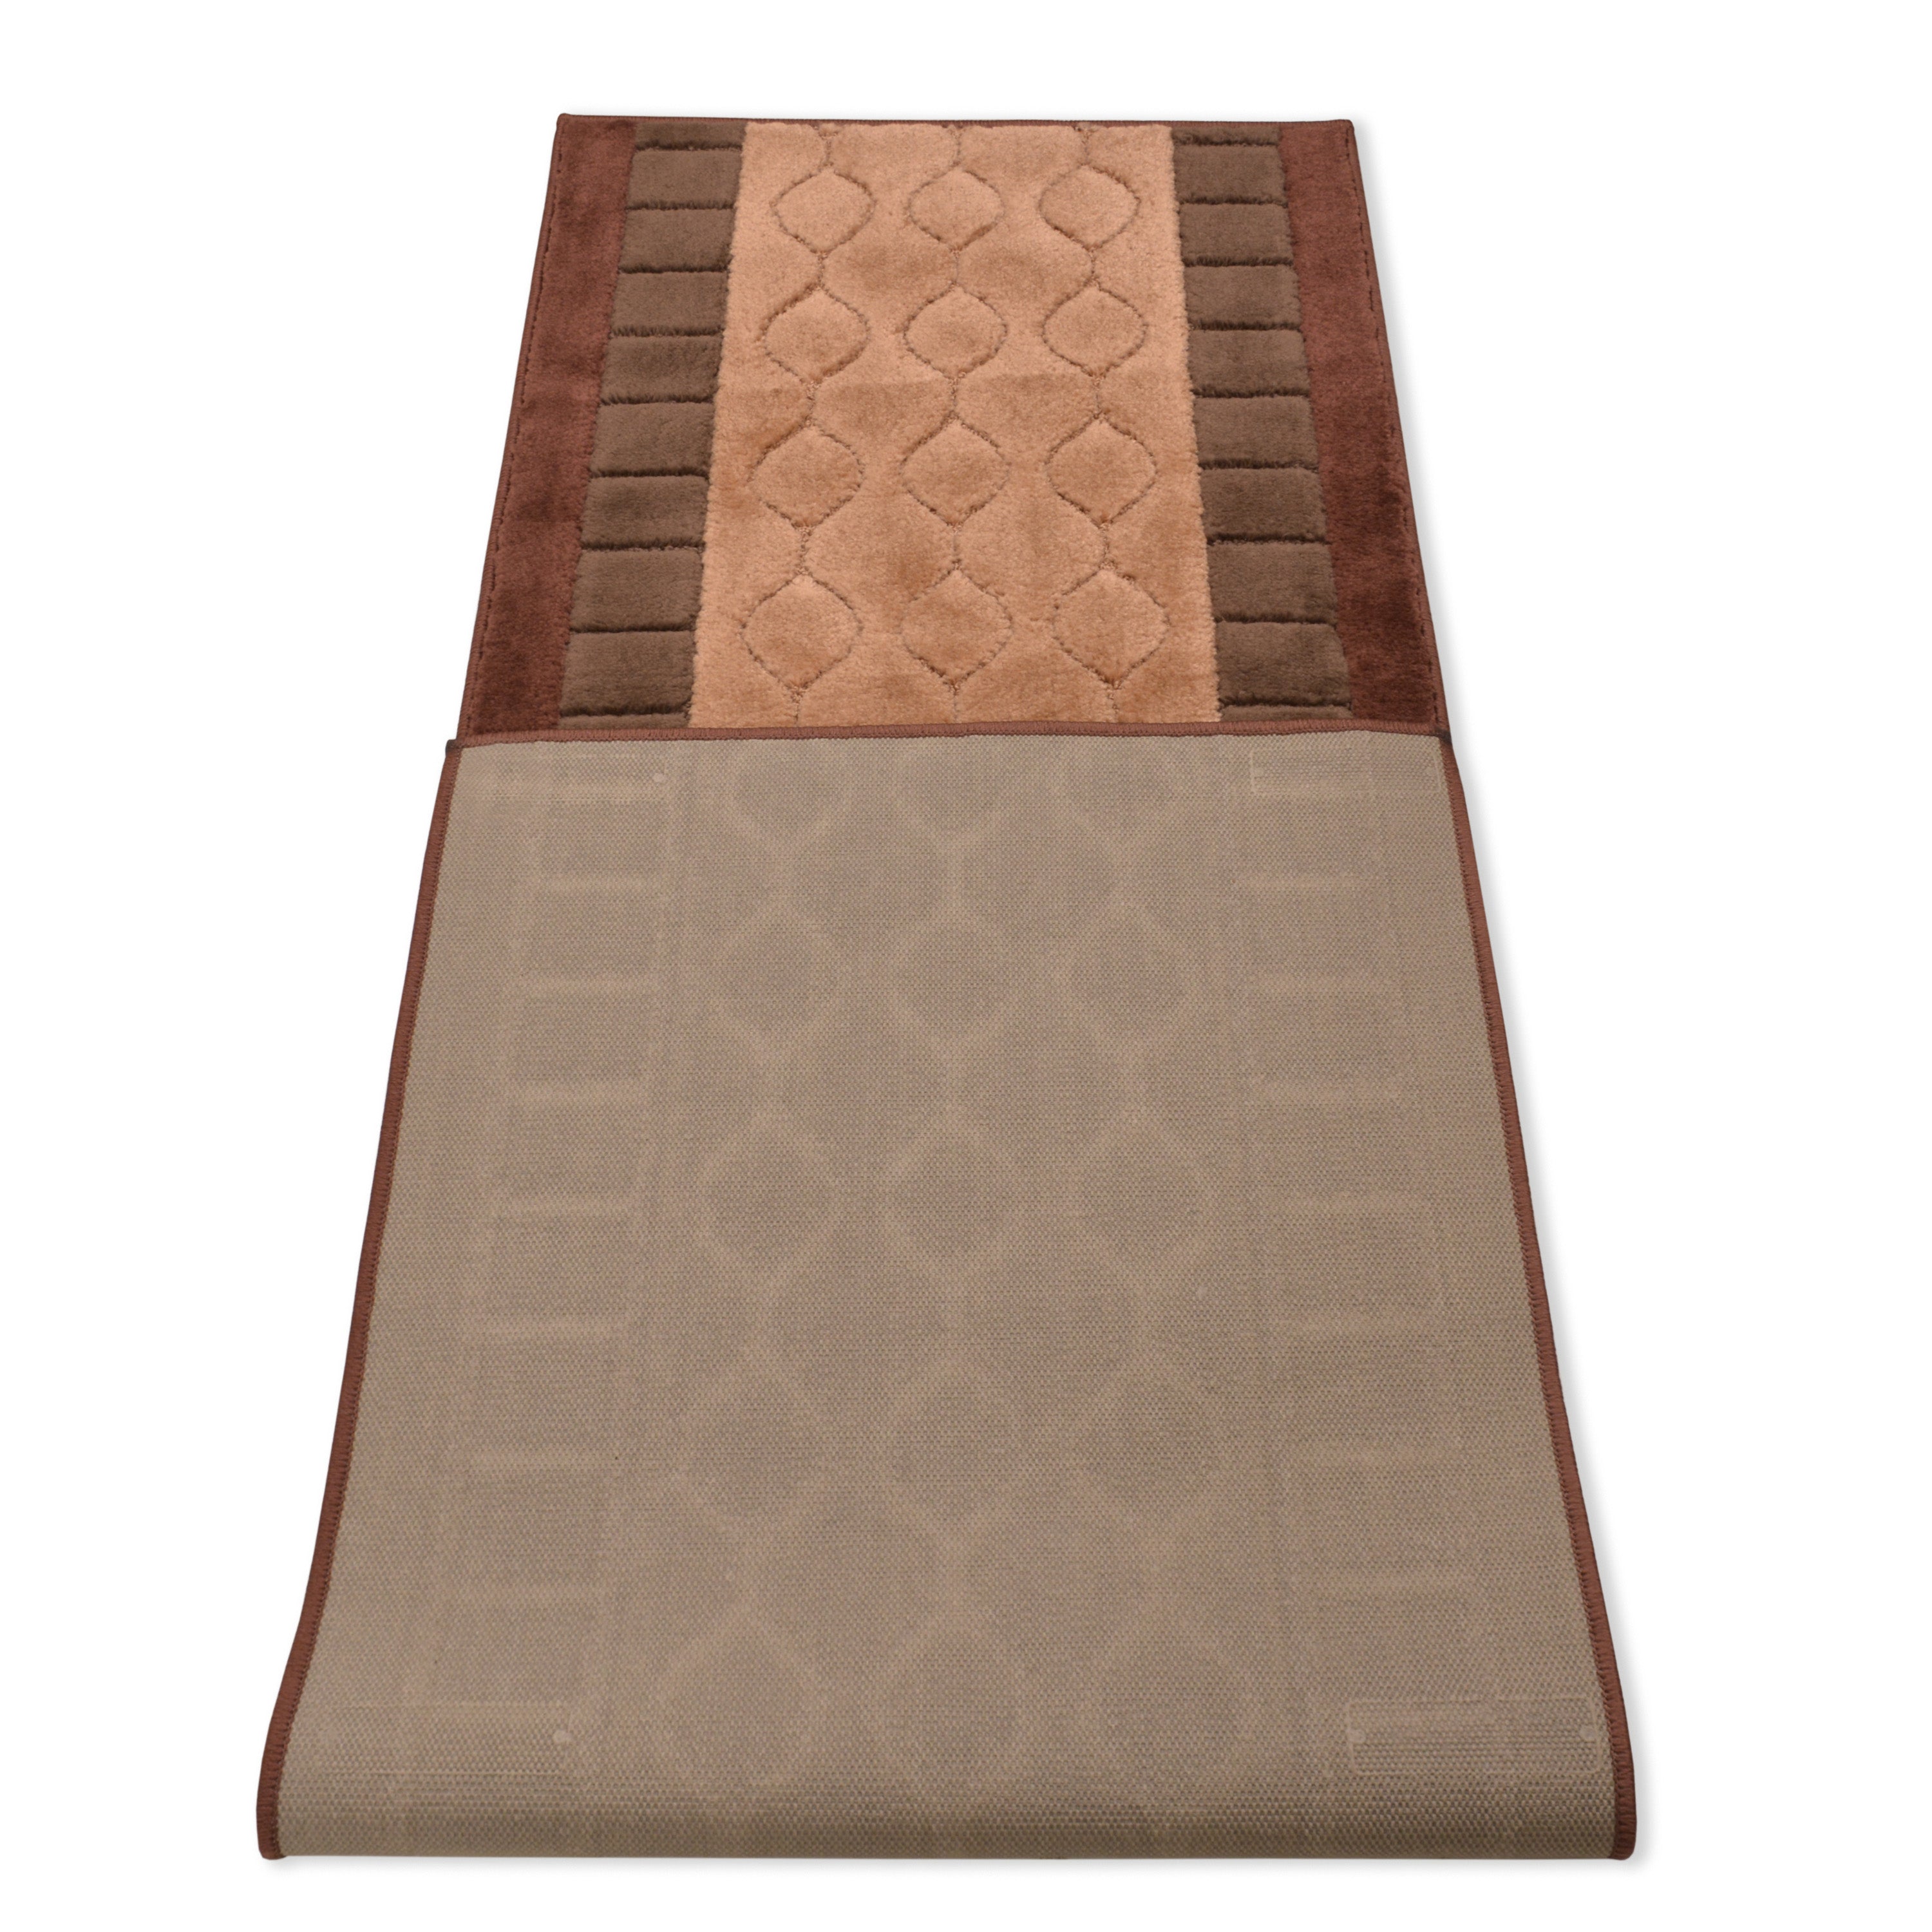 Custom Size Runner Rug Volley Circle Beige-Brown Color Skid Resistant Rug Runner Customize Up to 50 Feet and 30 Inch Width Cut to Size Rugs